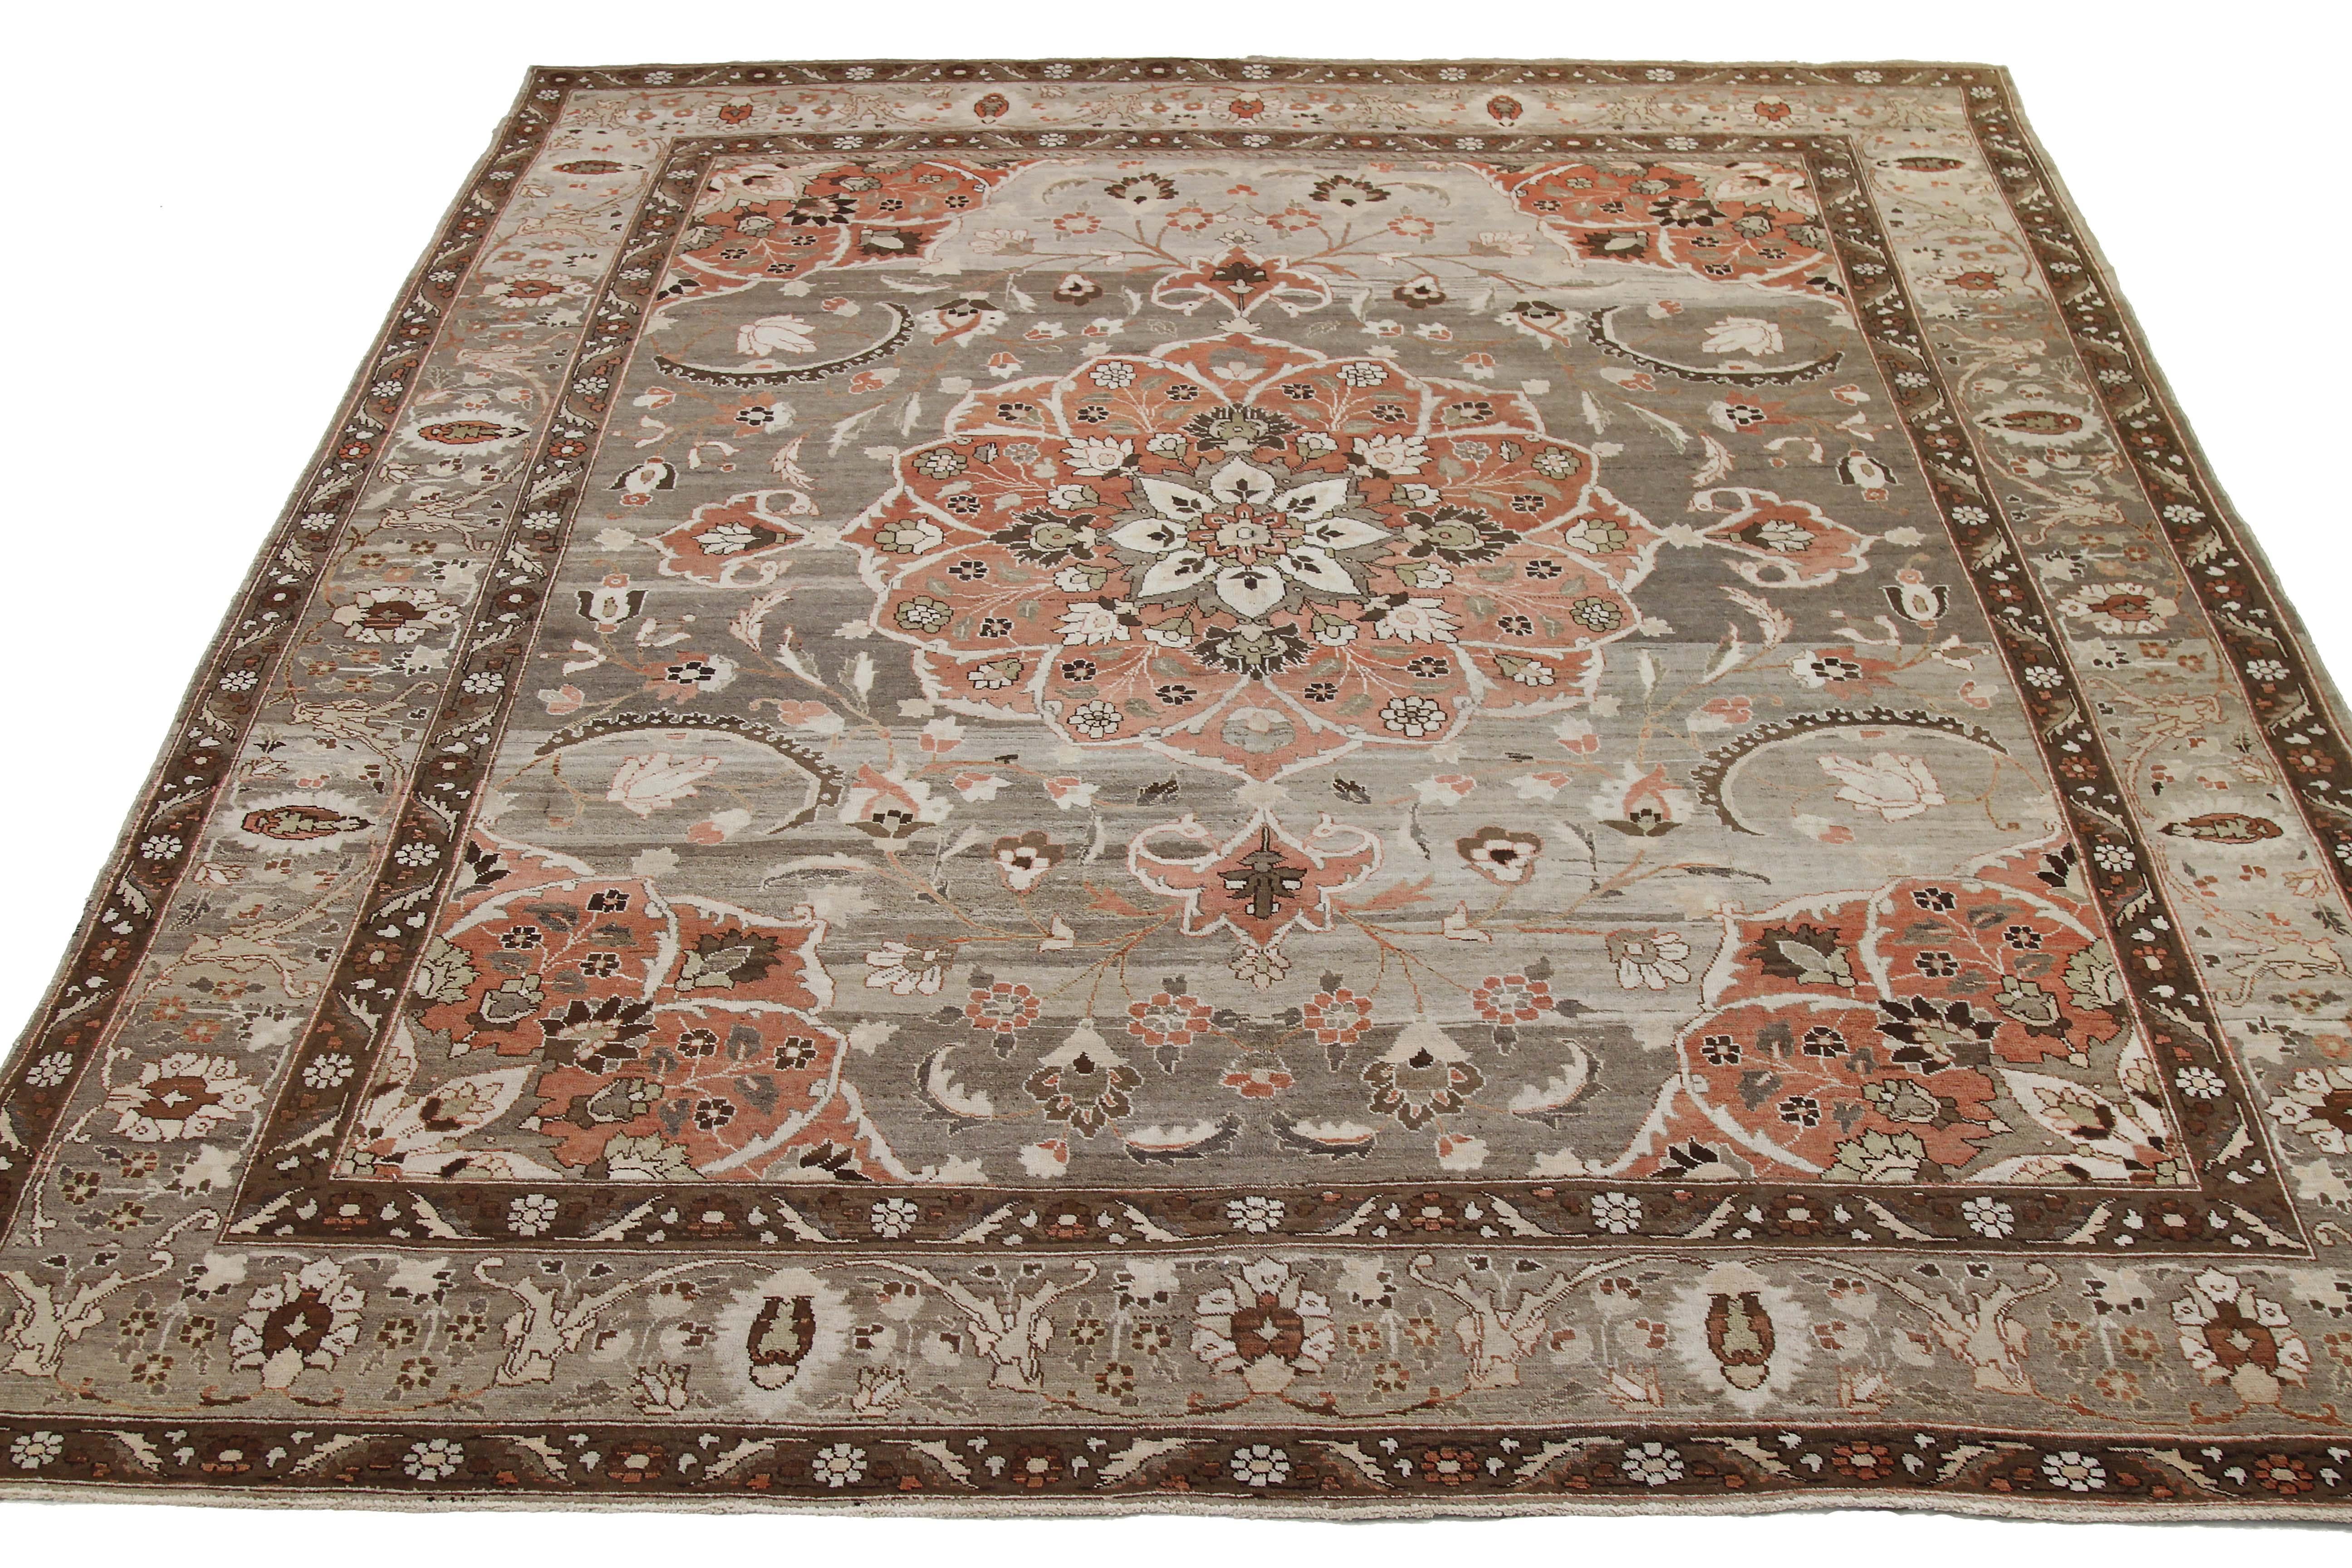 Antique Persian runner rug handmade from the highest quality of sheep’s wool. It’s colored with eco-friendly vegetable dyes that are safe for humans and pets alike. It’s a traditional Khoi design handwoven by expert artisans. It’s a lovely area rug